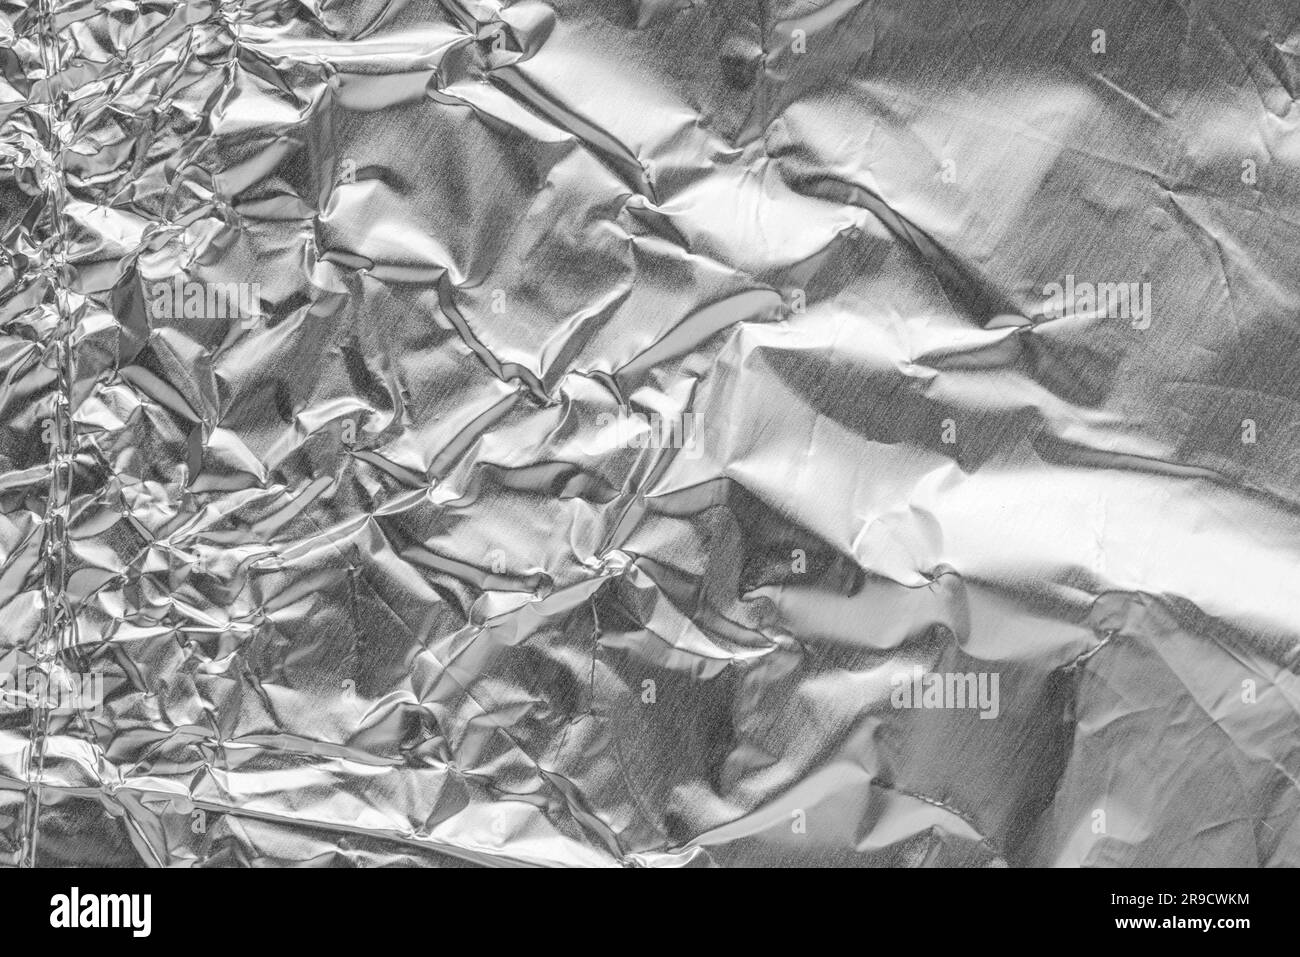 https://c8.alamy.com/comp/2R9CWKM/crumpled-bright-shiny-metallic-silver-aluminium-foil-background-flat-lay-view-backdrop-with-copy-space-for-text-2R9CWKM.jpg